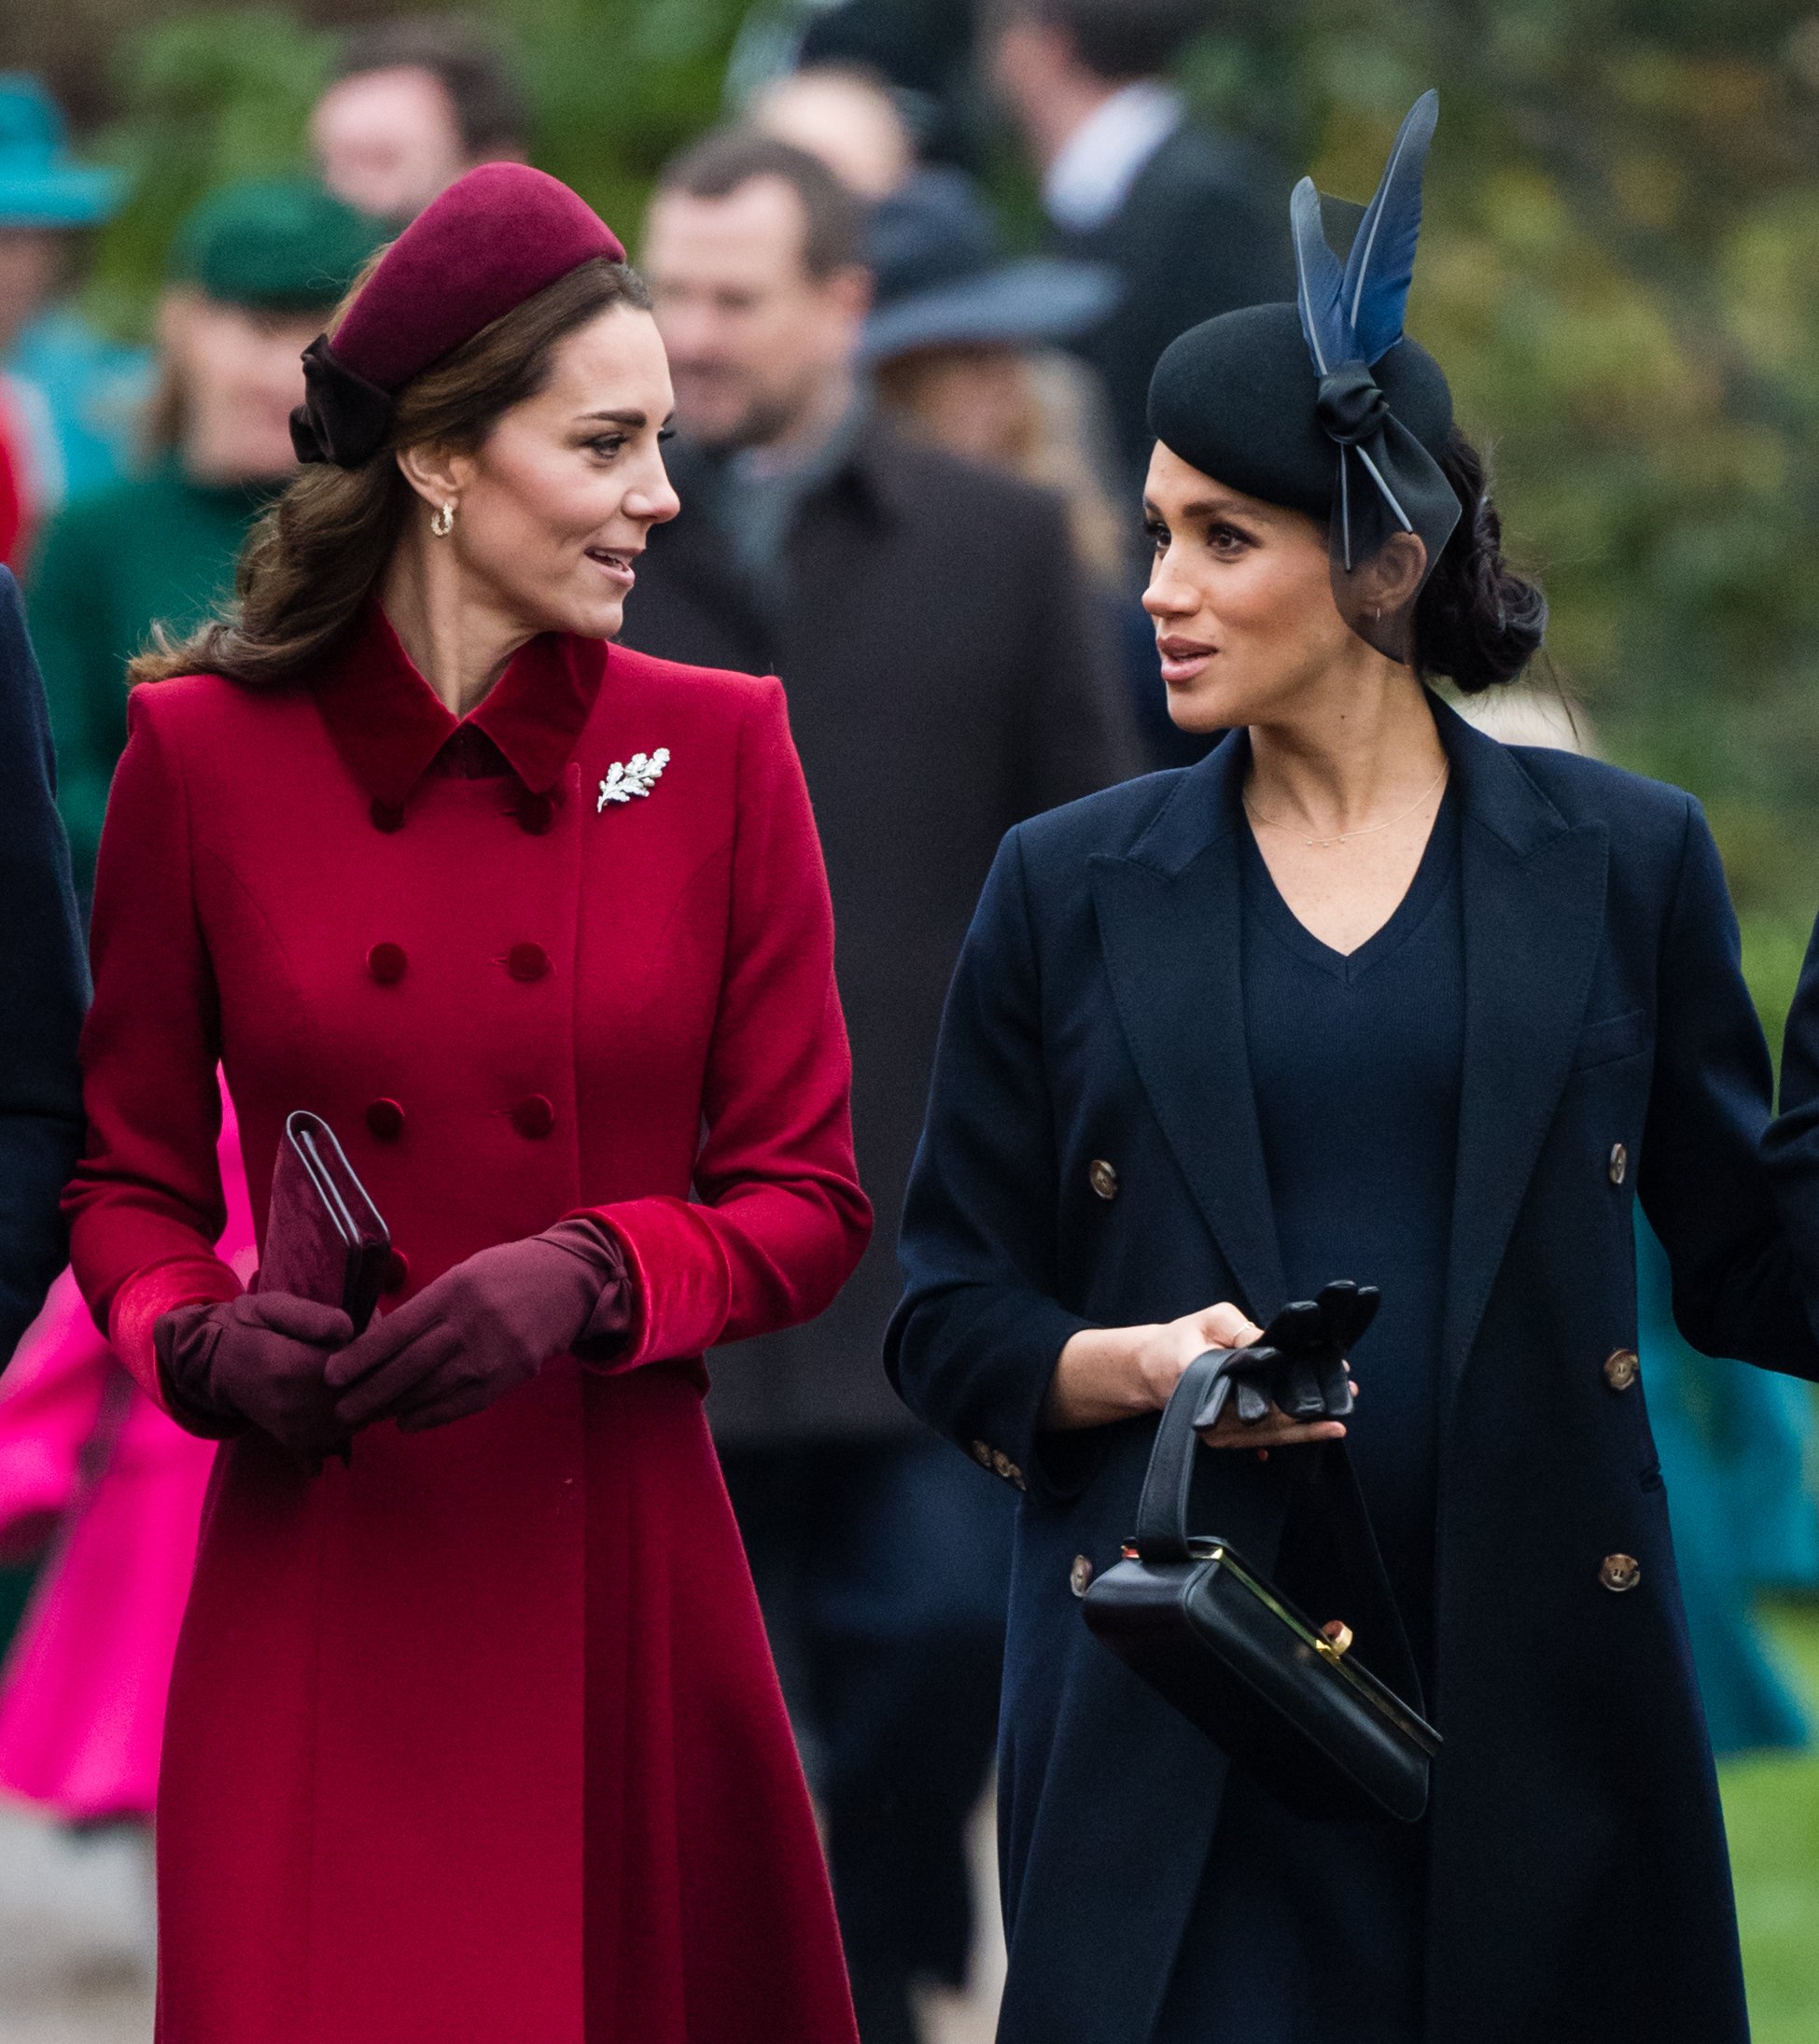 Kate Middleton and Meghan Markle attend Christmas Day Church service at Church of St Mary Magdalene on the Sandringham estate on December 25, 2018 in King's Lynn, England┃Source: Getty Images